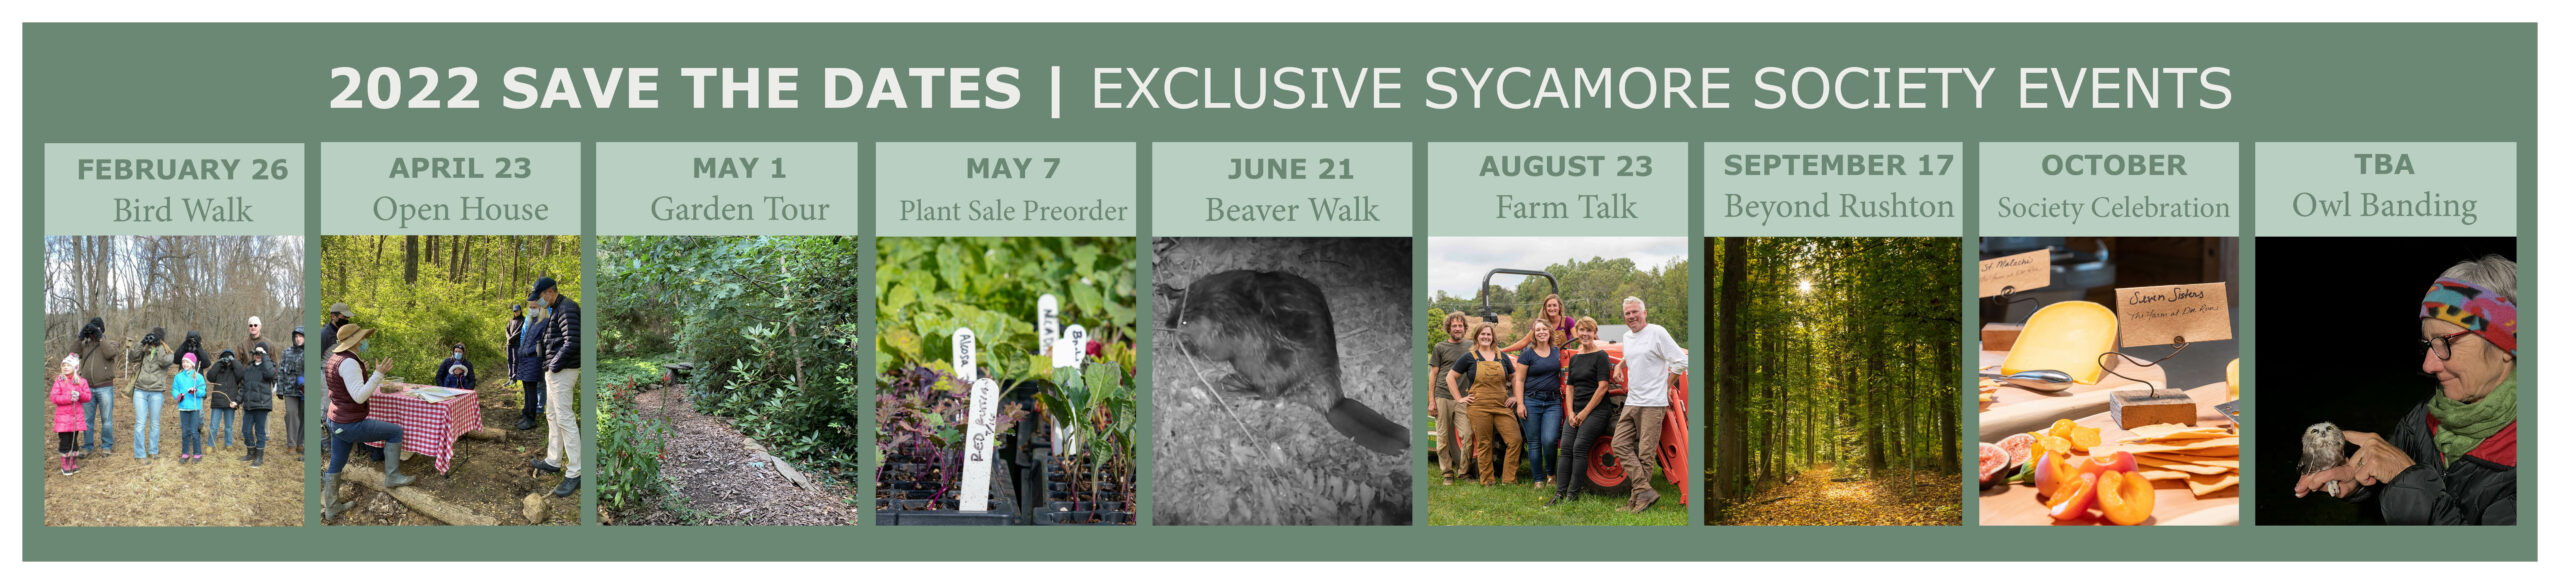 Sycamore Society 2022 Events Postcard_banner for website2